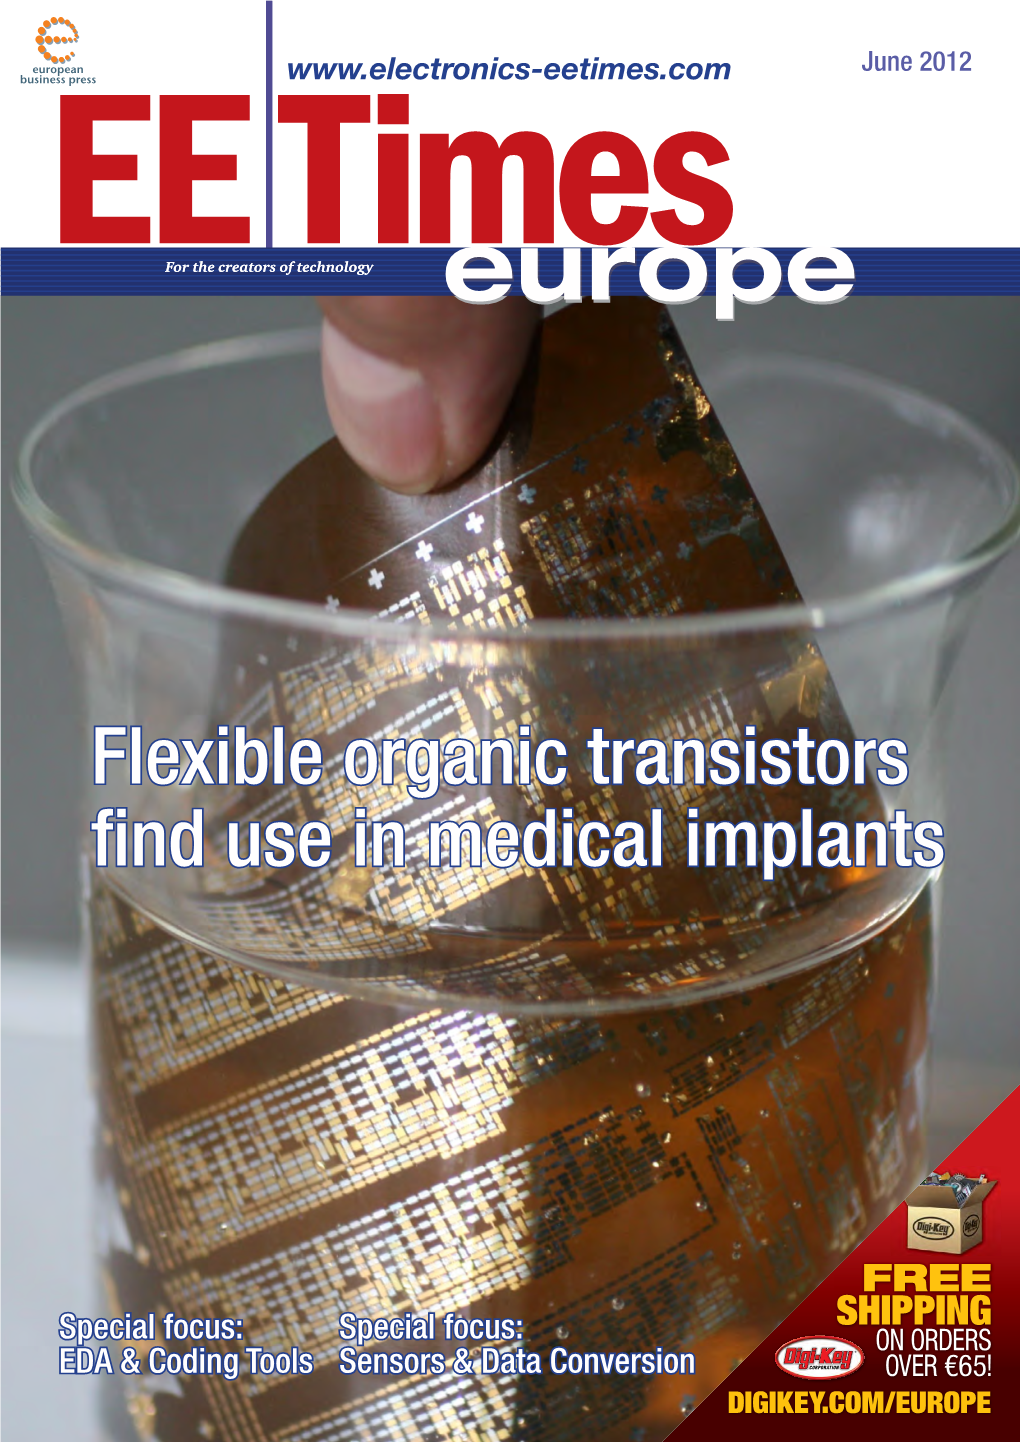 Flexible Organic Transistors Find Use in Medical Implants